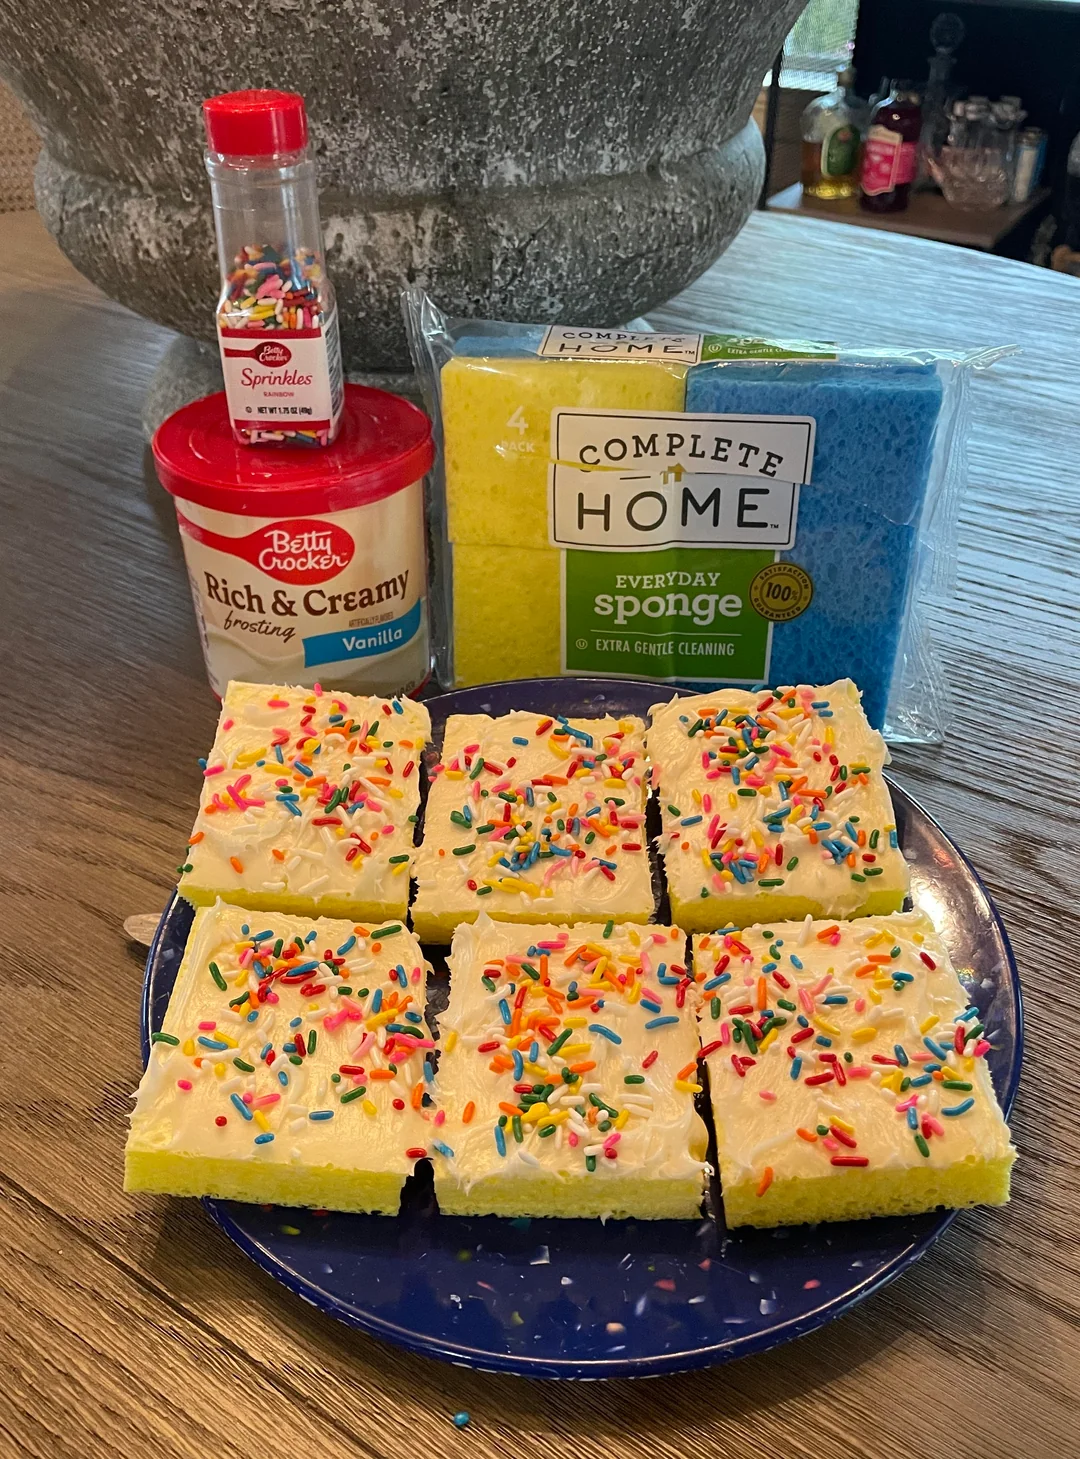 Plate of frosted cake squares with sprinkles; background shows a bottle of sprinkles, a sponge pack, and a frosting container